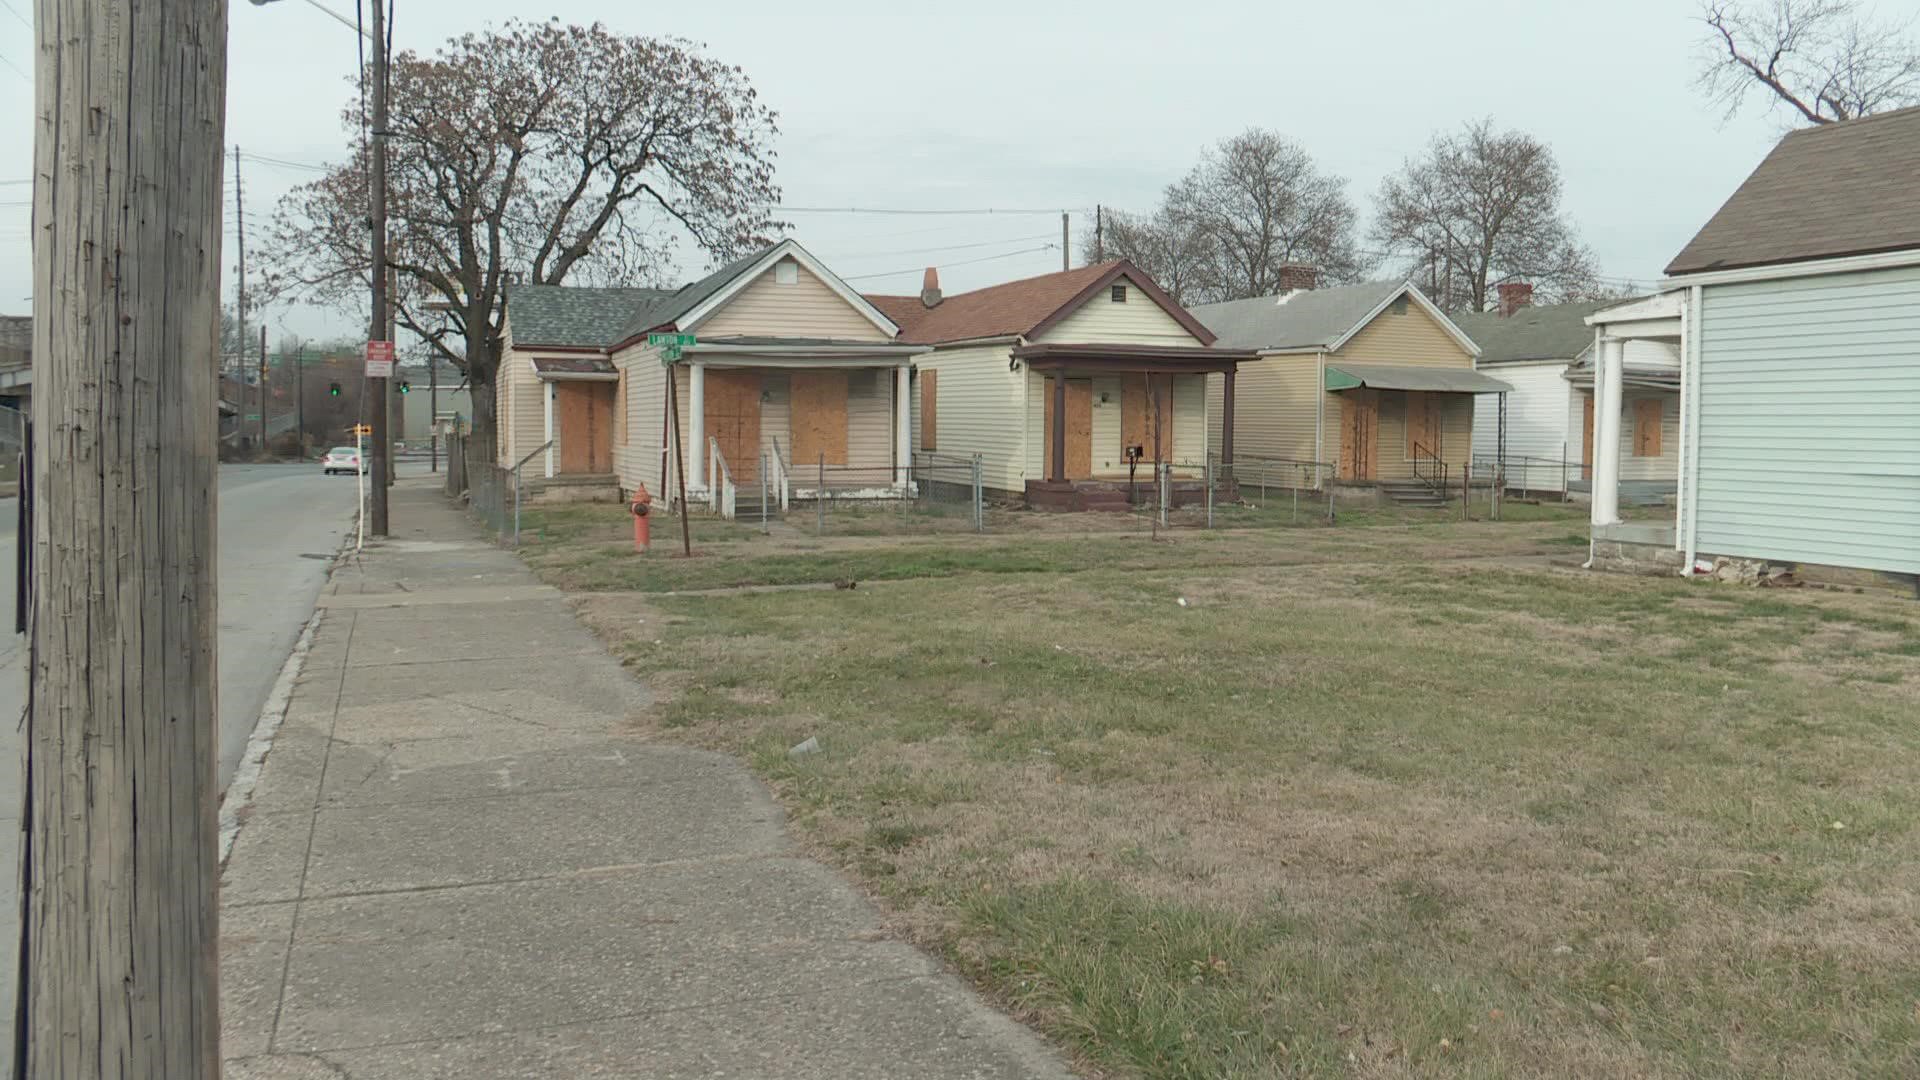 The street in the Meriweather neighborhood is made up of shotgun homes and activists are hoping to save them by designating them as historical.